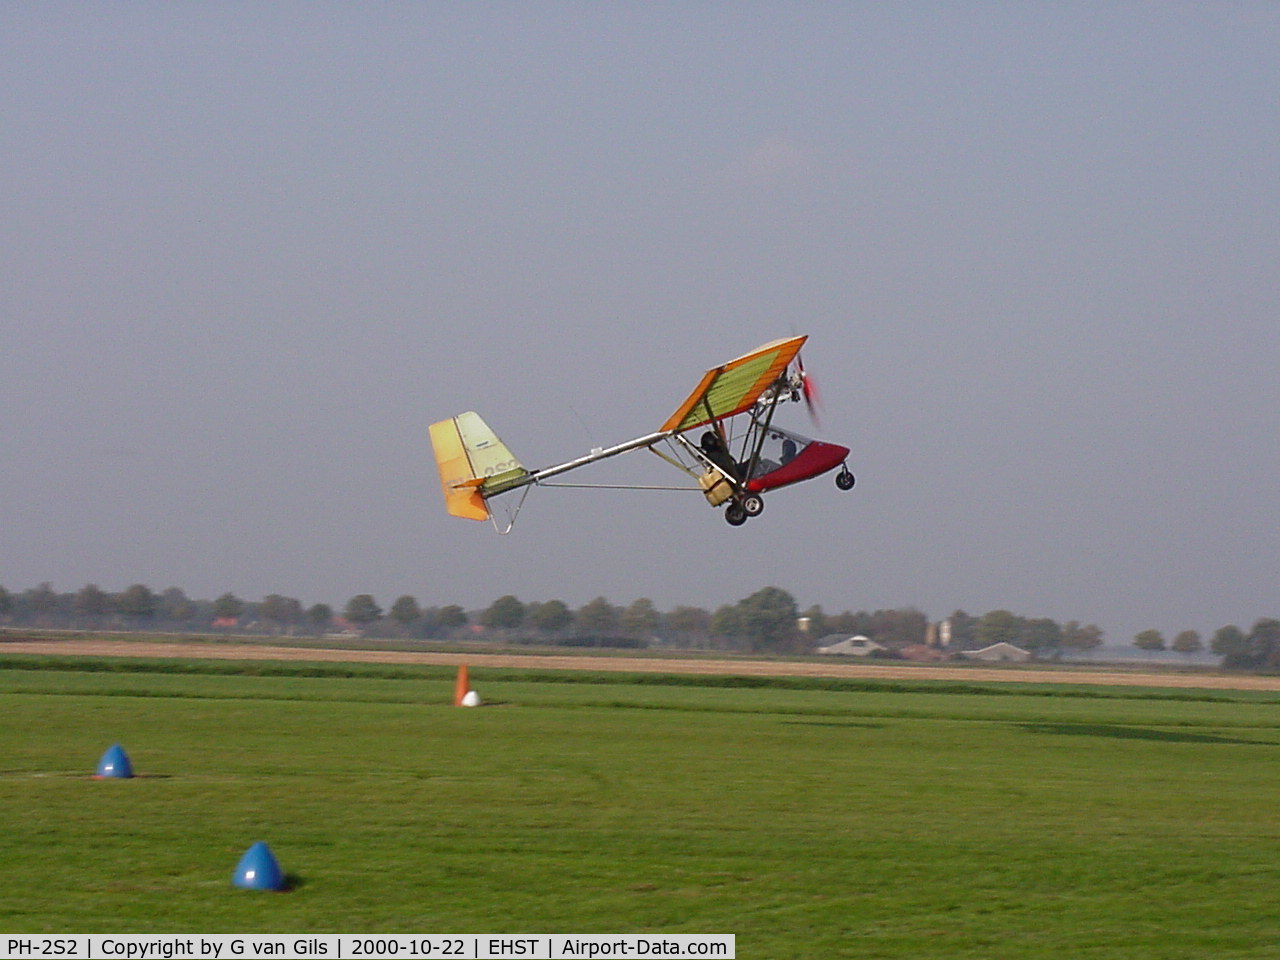 PH-2S2, Comco FOX C 22 B C/N 9501-3641, A former training ultralight aircraft (C-22,  the owner today is Mans Muurman) from the Microlight Vliegverenging Westerwolde. I flew many hours with this aircraft in 1999.